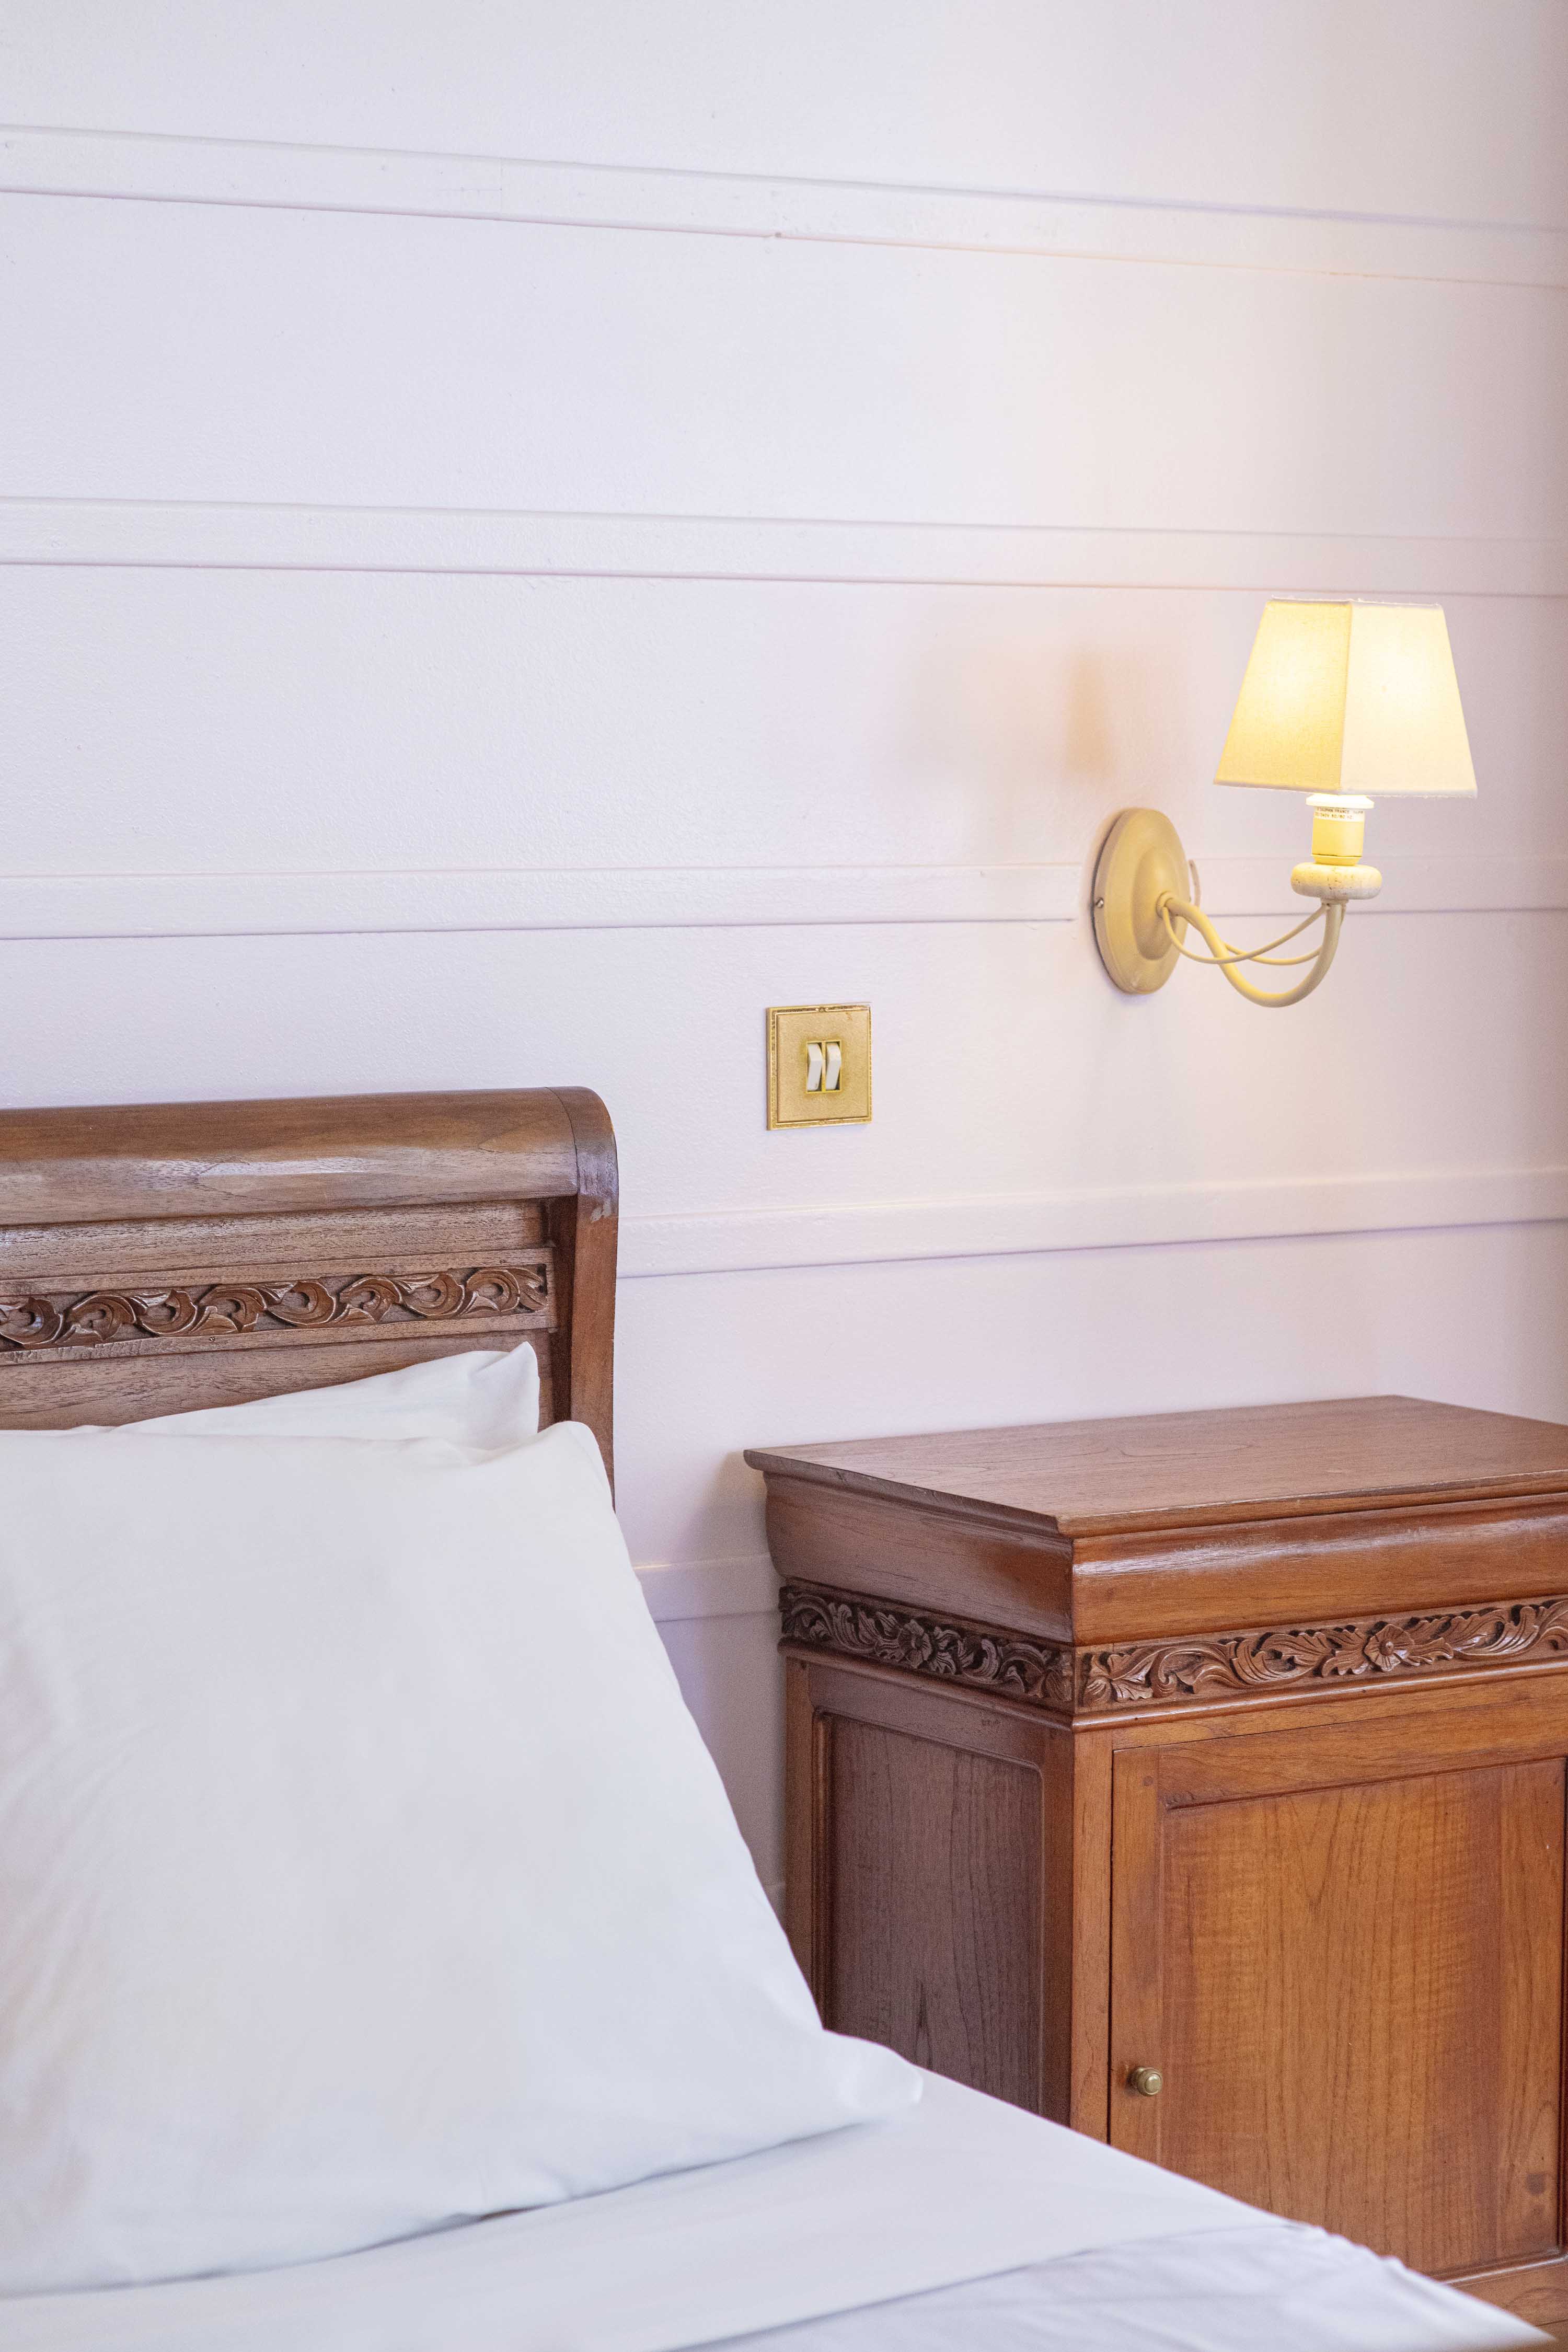 Lighting and wooden furniture in a room | Source : Hotel Le Relais des Cîmes - www.relaisdescimes.com